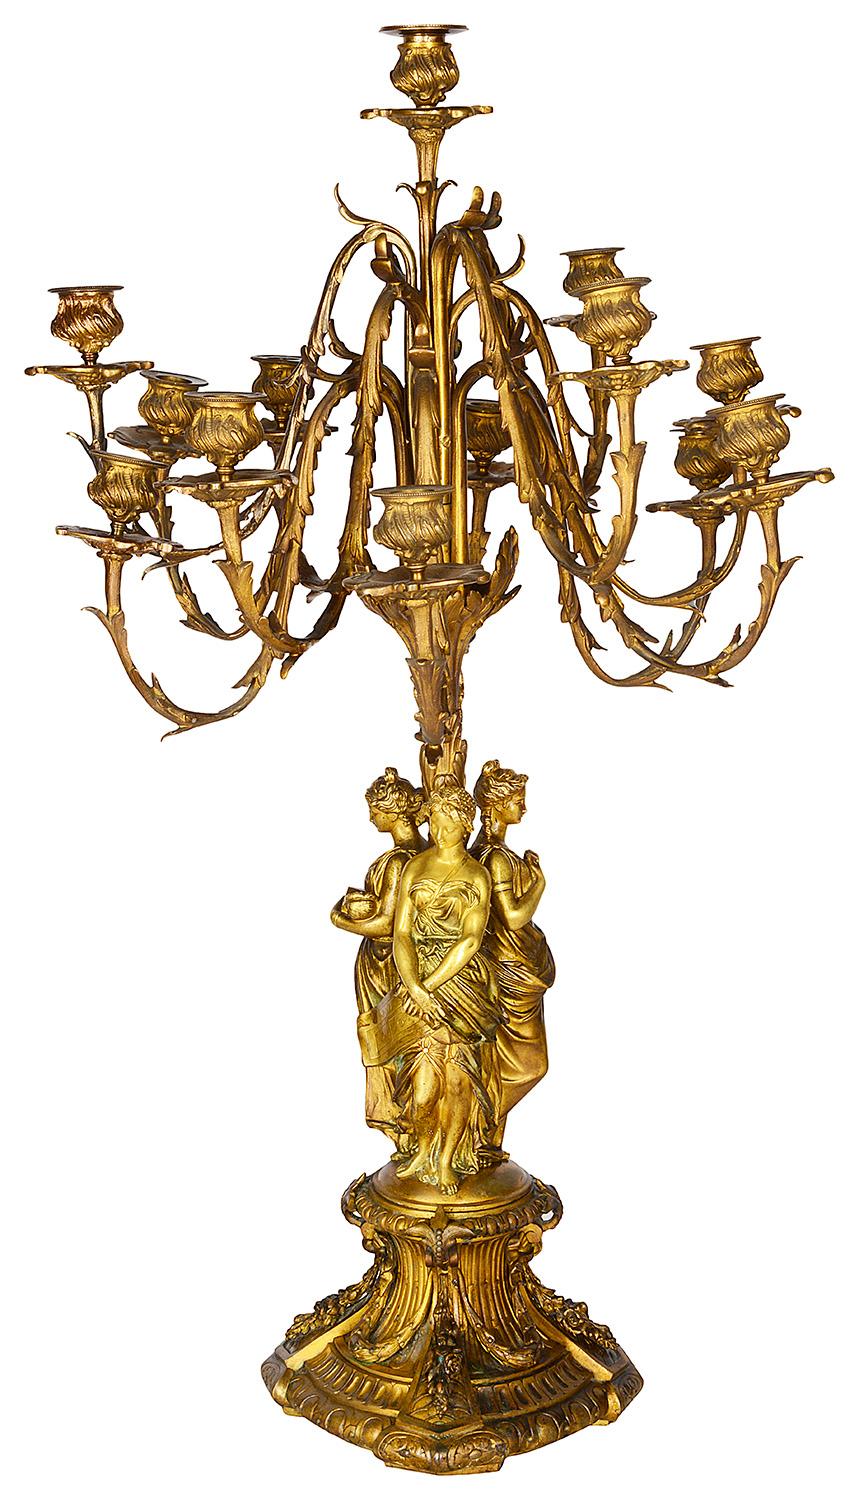 A very impressive and fine quality pair of early 19th century gilded ormolu 13 branch candelabra, each with wonderful scrolling foliate decoration, supported by three classical maidens representing the arts of painting, sculpture and architecture,